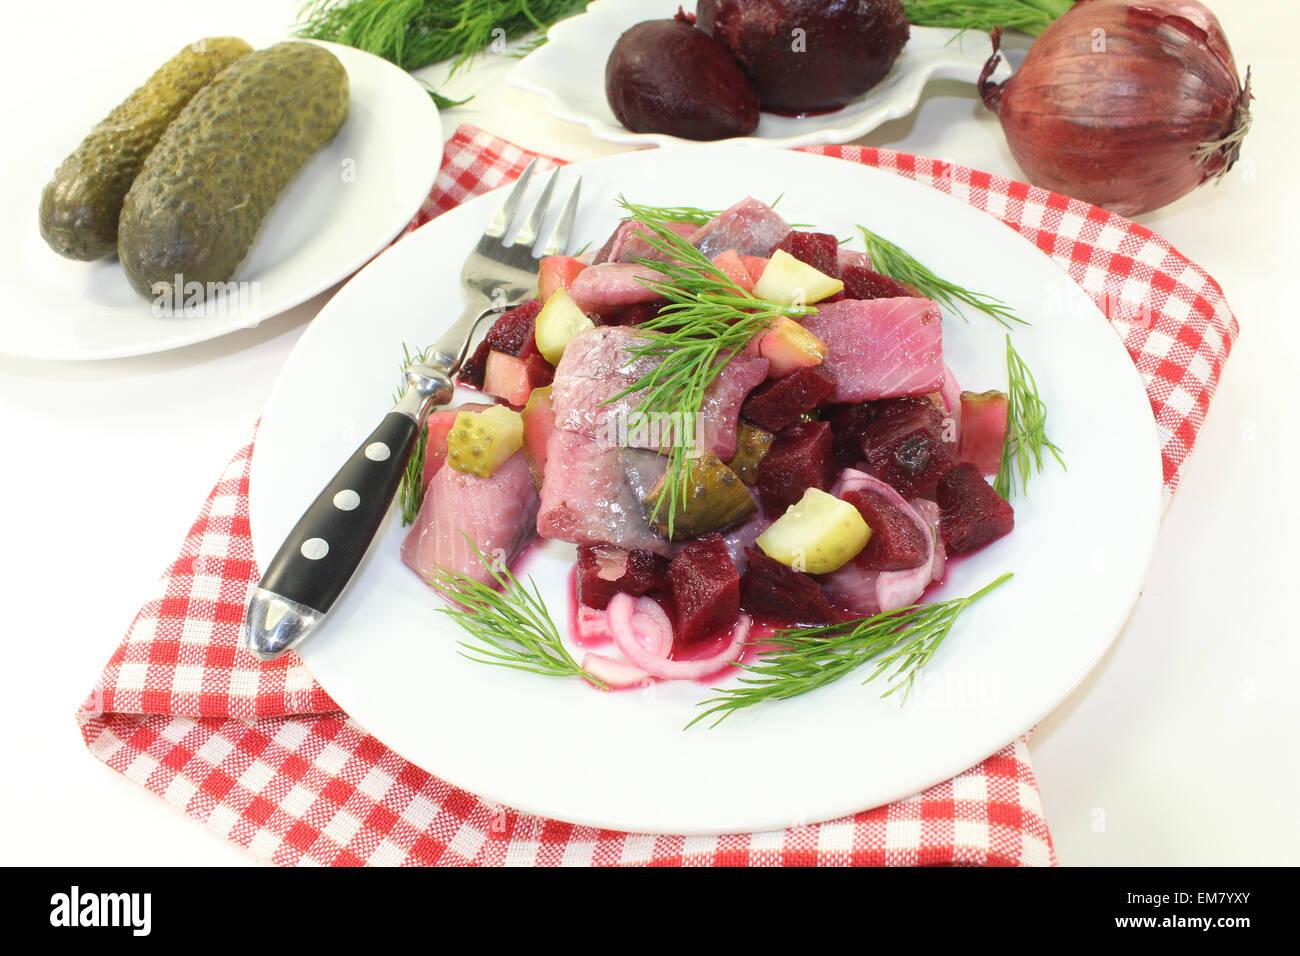 Matie salad with beetroot, onions and pickles Stock Photo